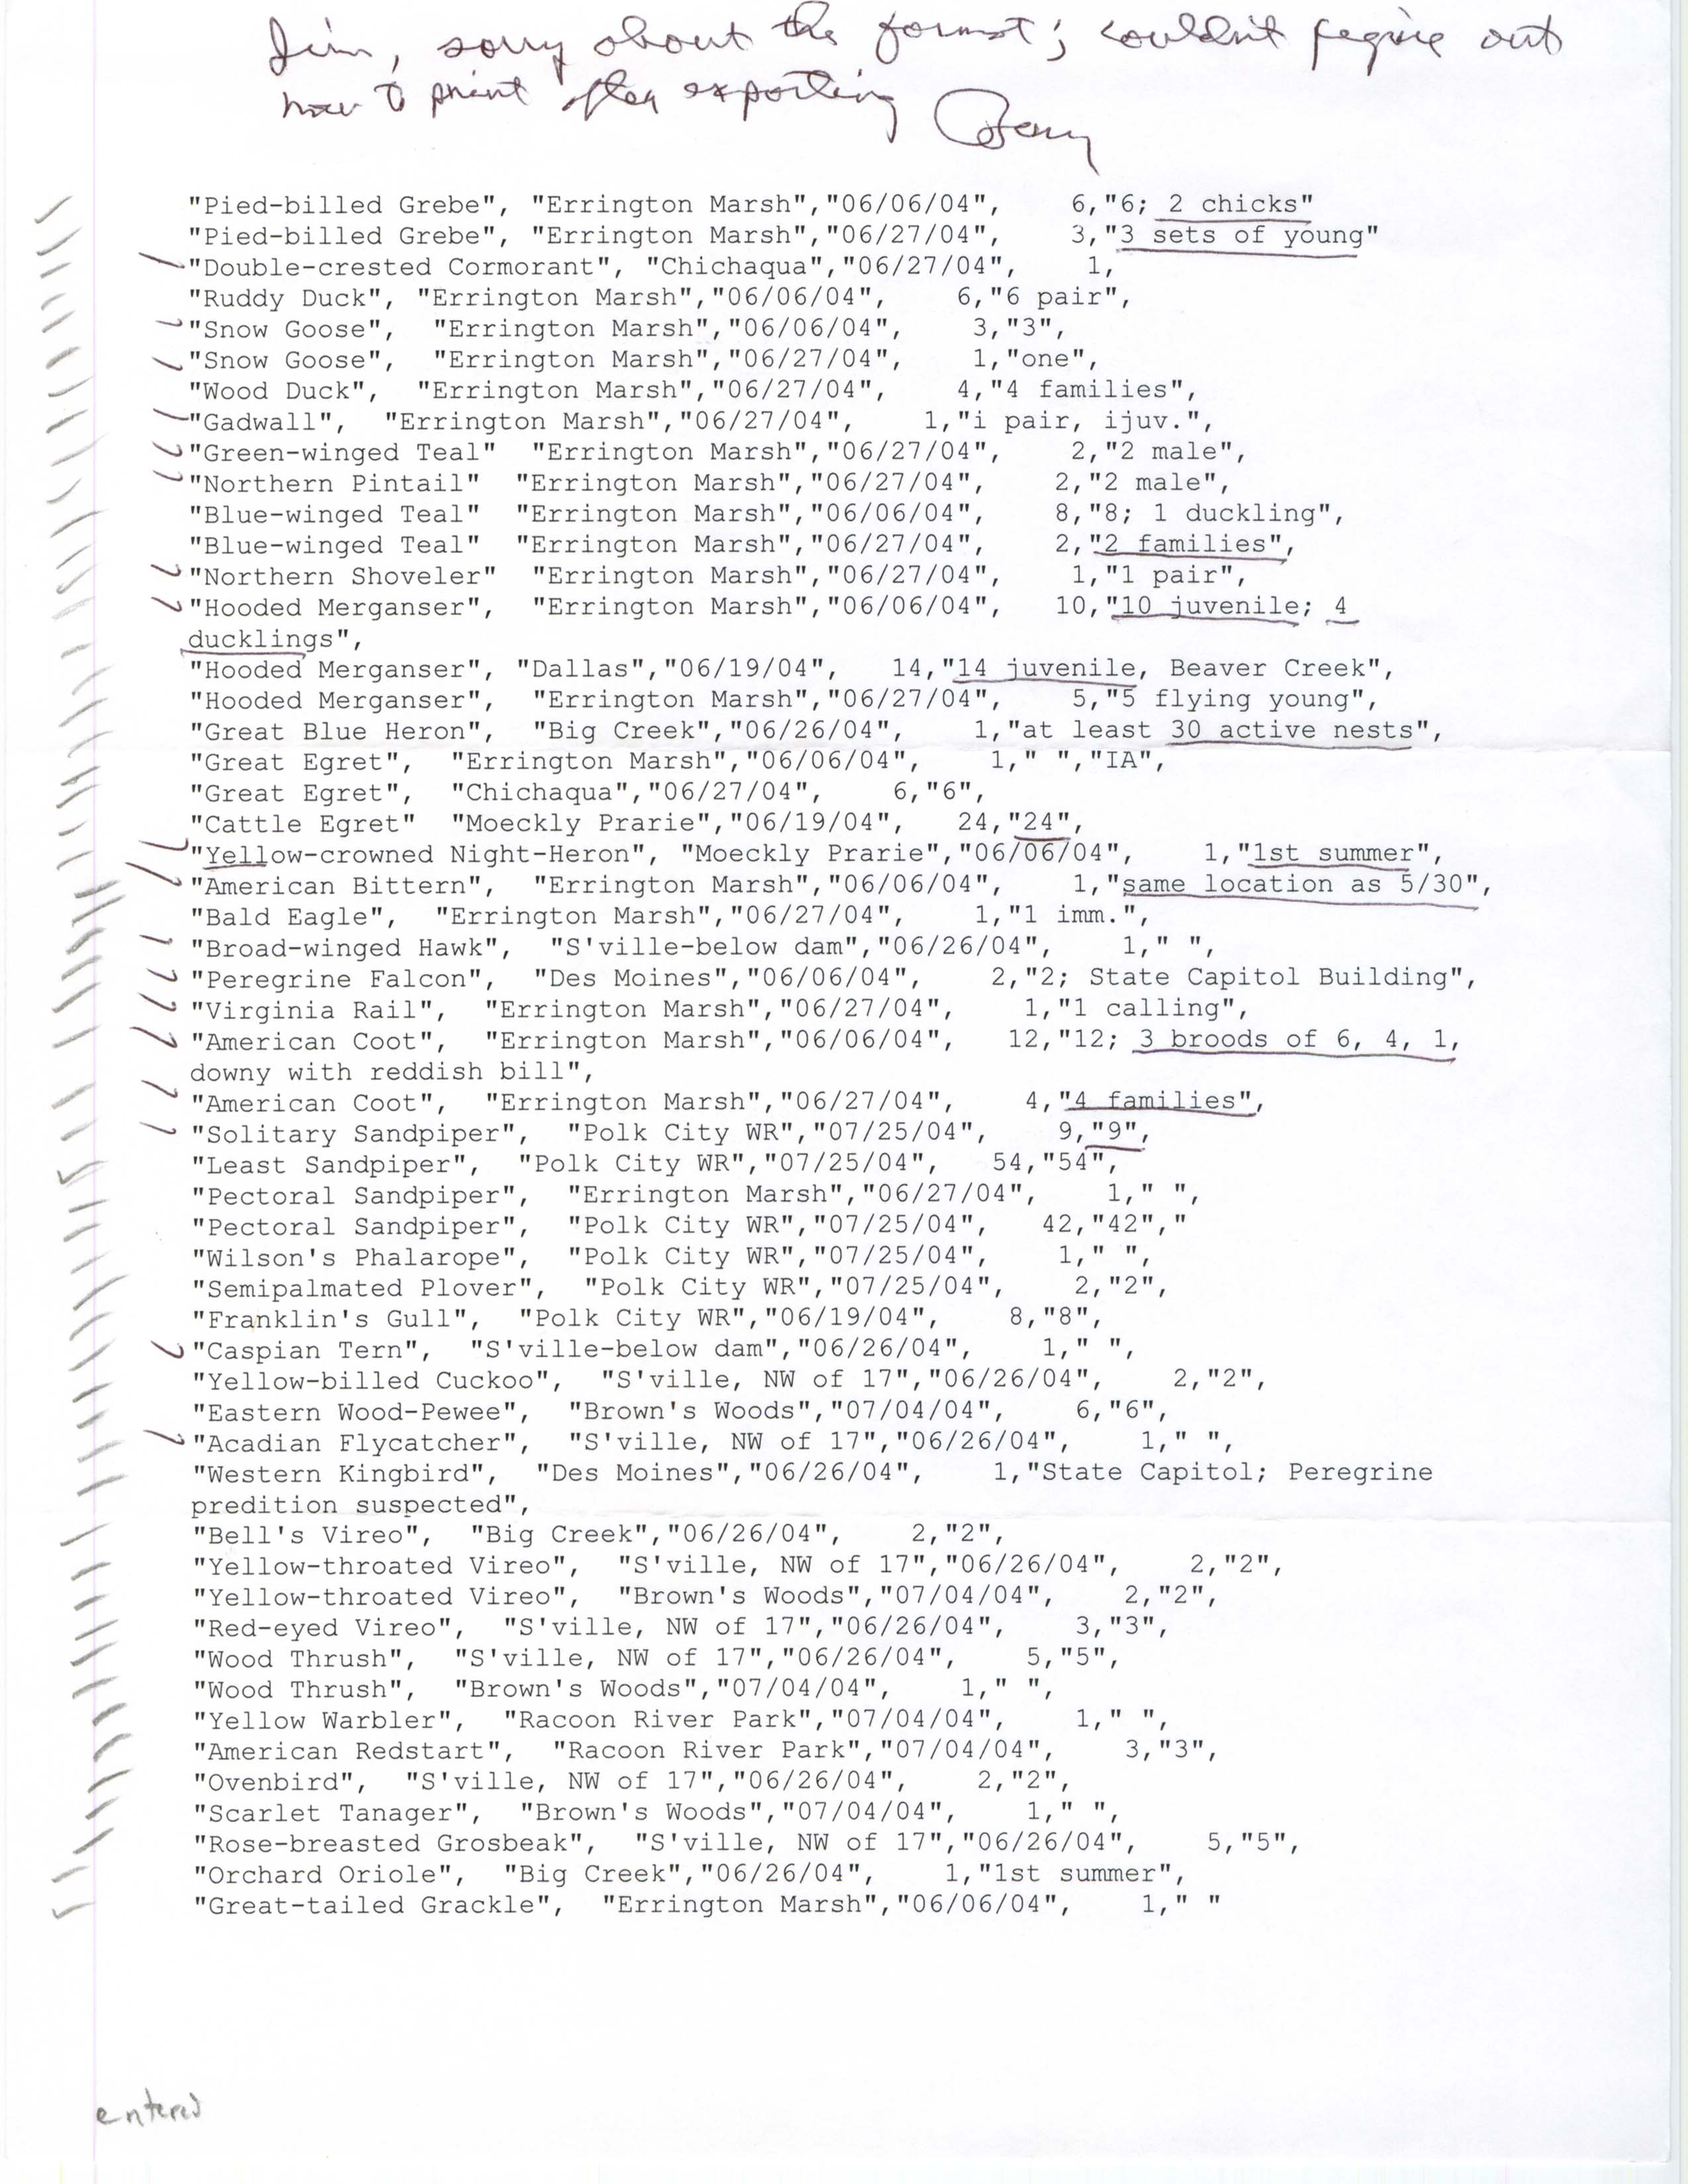 Field notes contributed by Bery Engebretsen, summer 2004